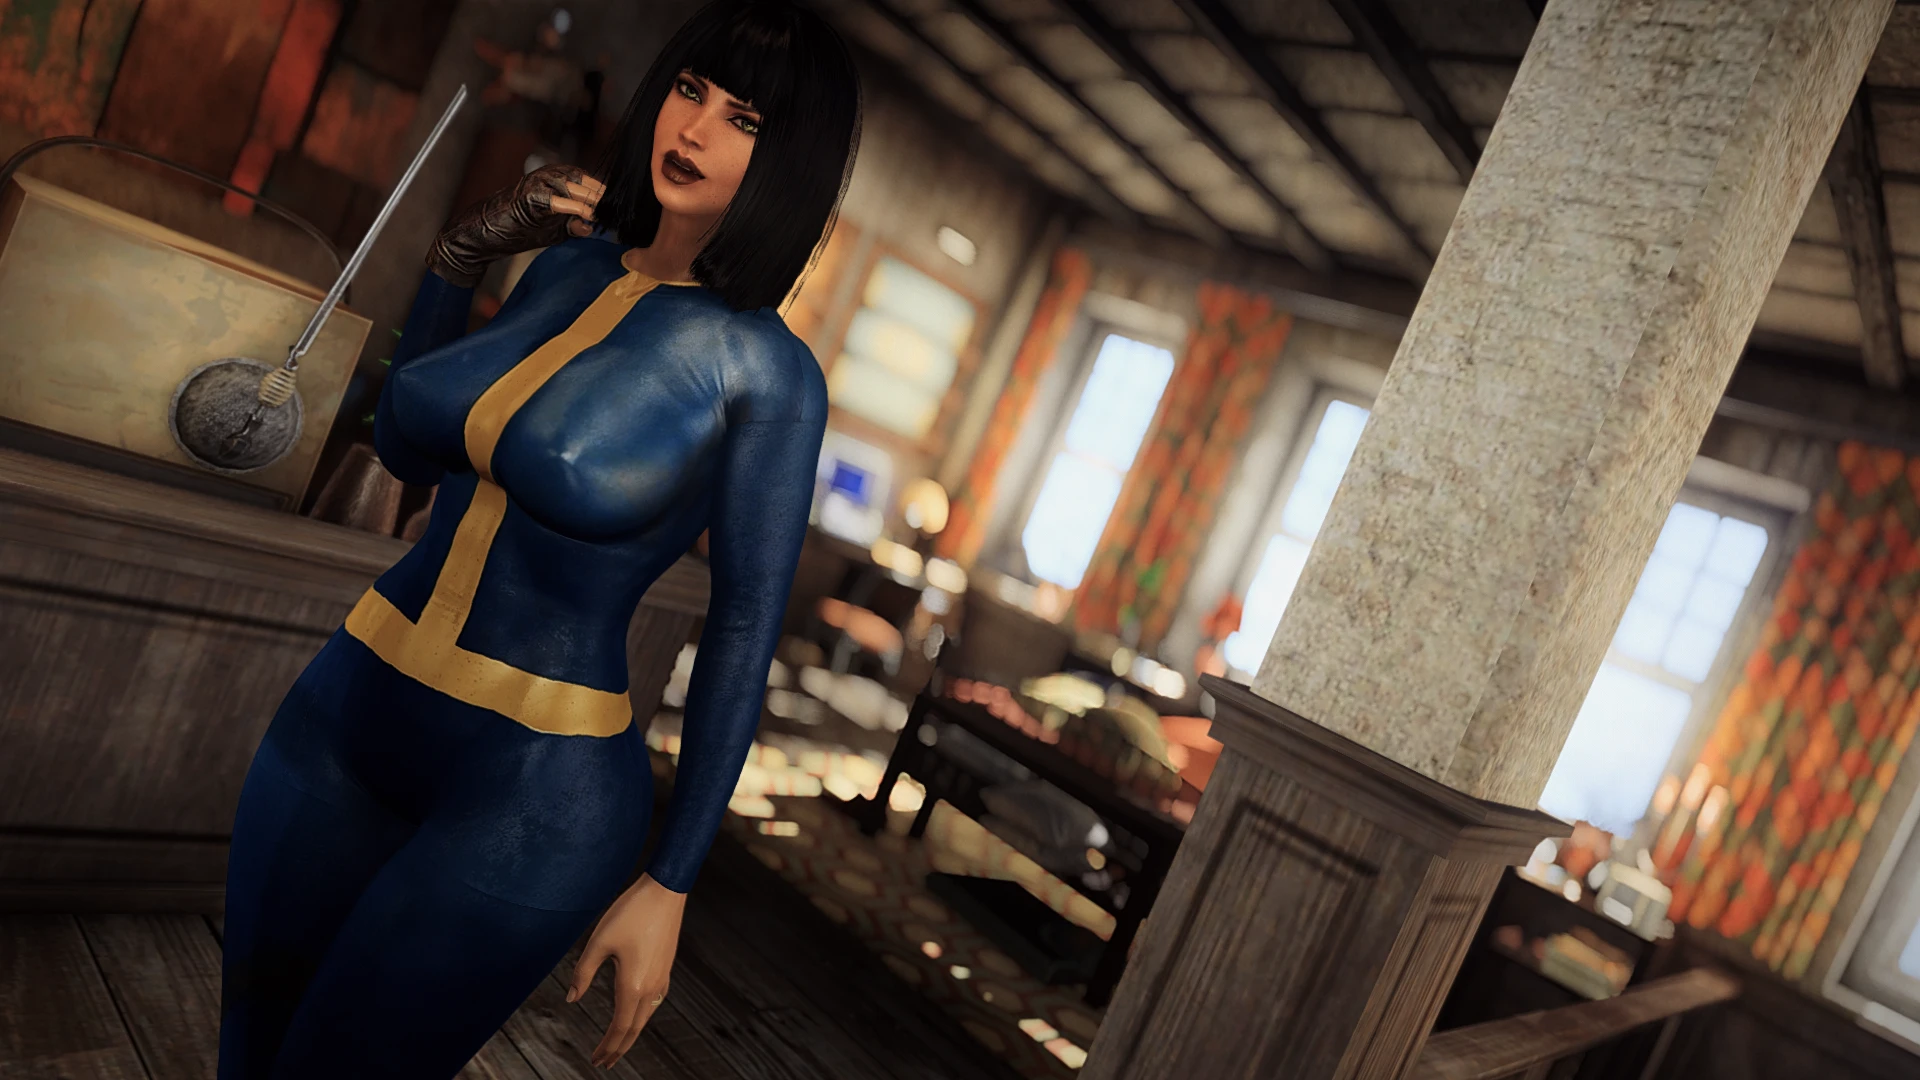 Classic Vault Suit At Fallout 4 Nexus Mods And Community